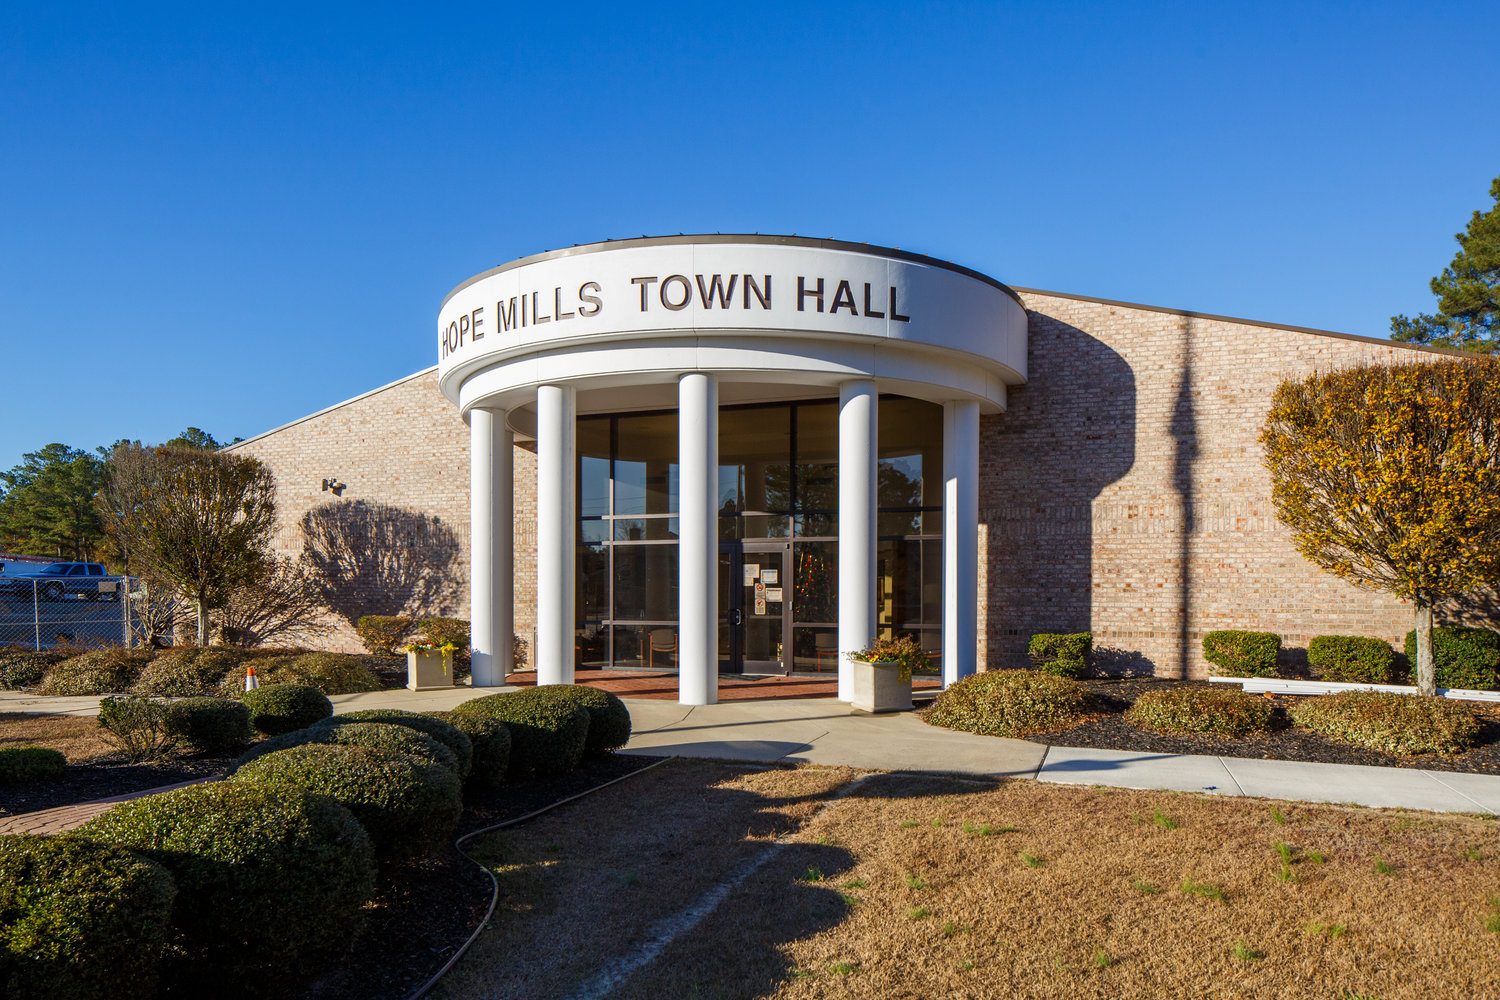 The Hope Mills Board of Commissioners on Monday held a public hearing on a plan to change the way town leaders are elected.